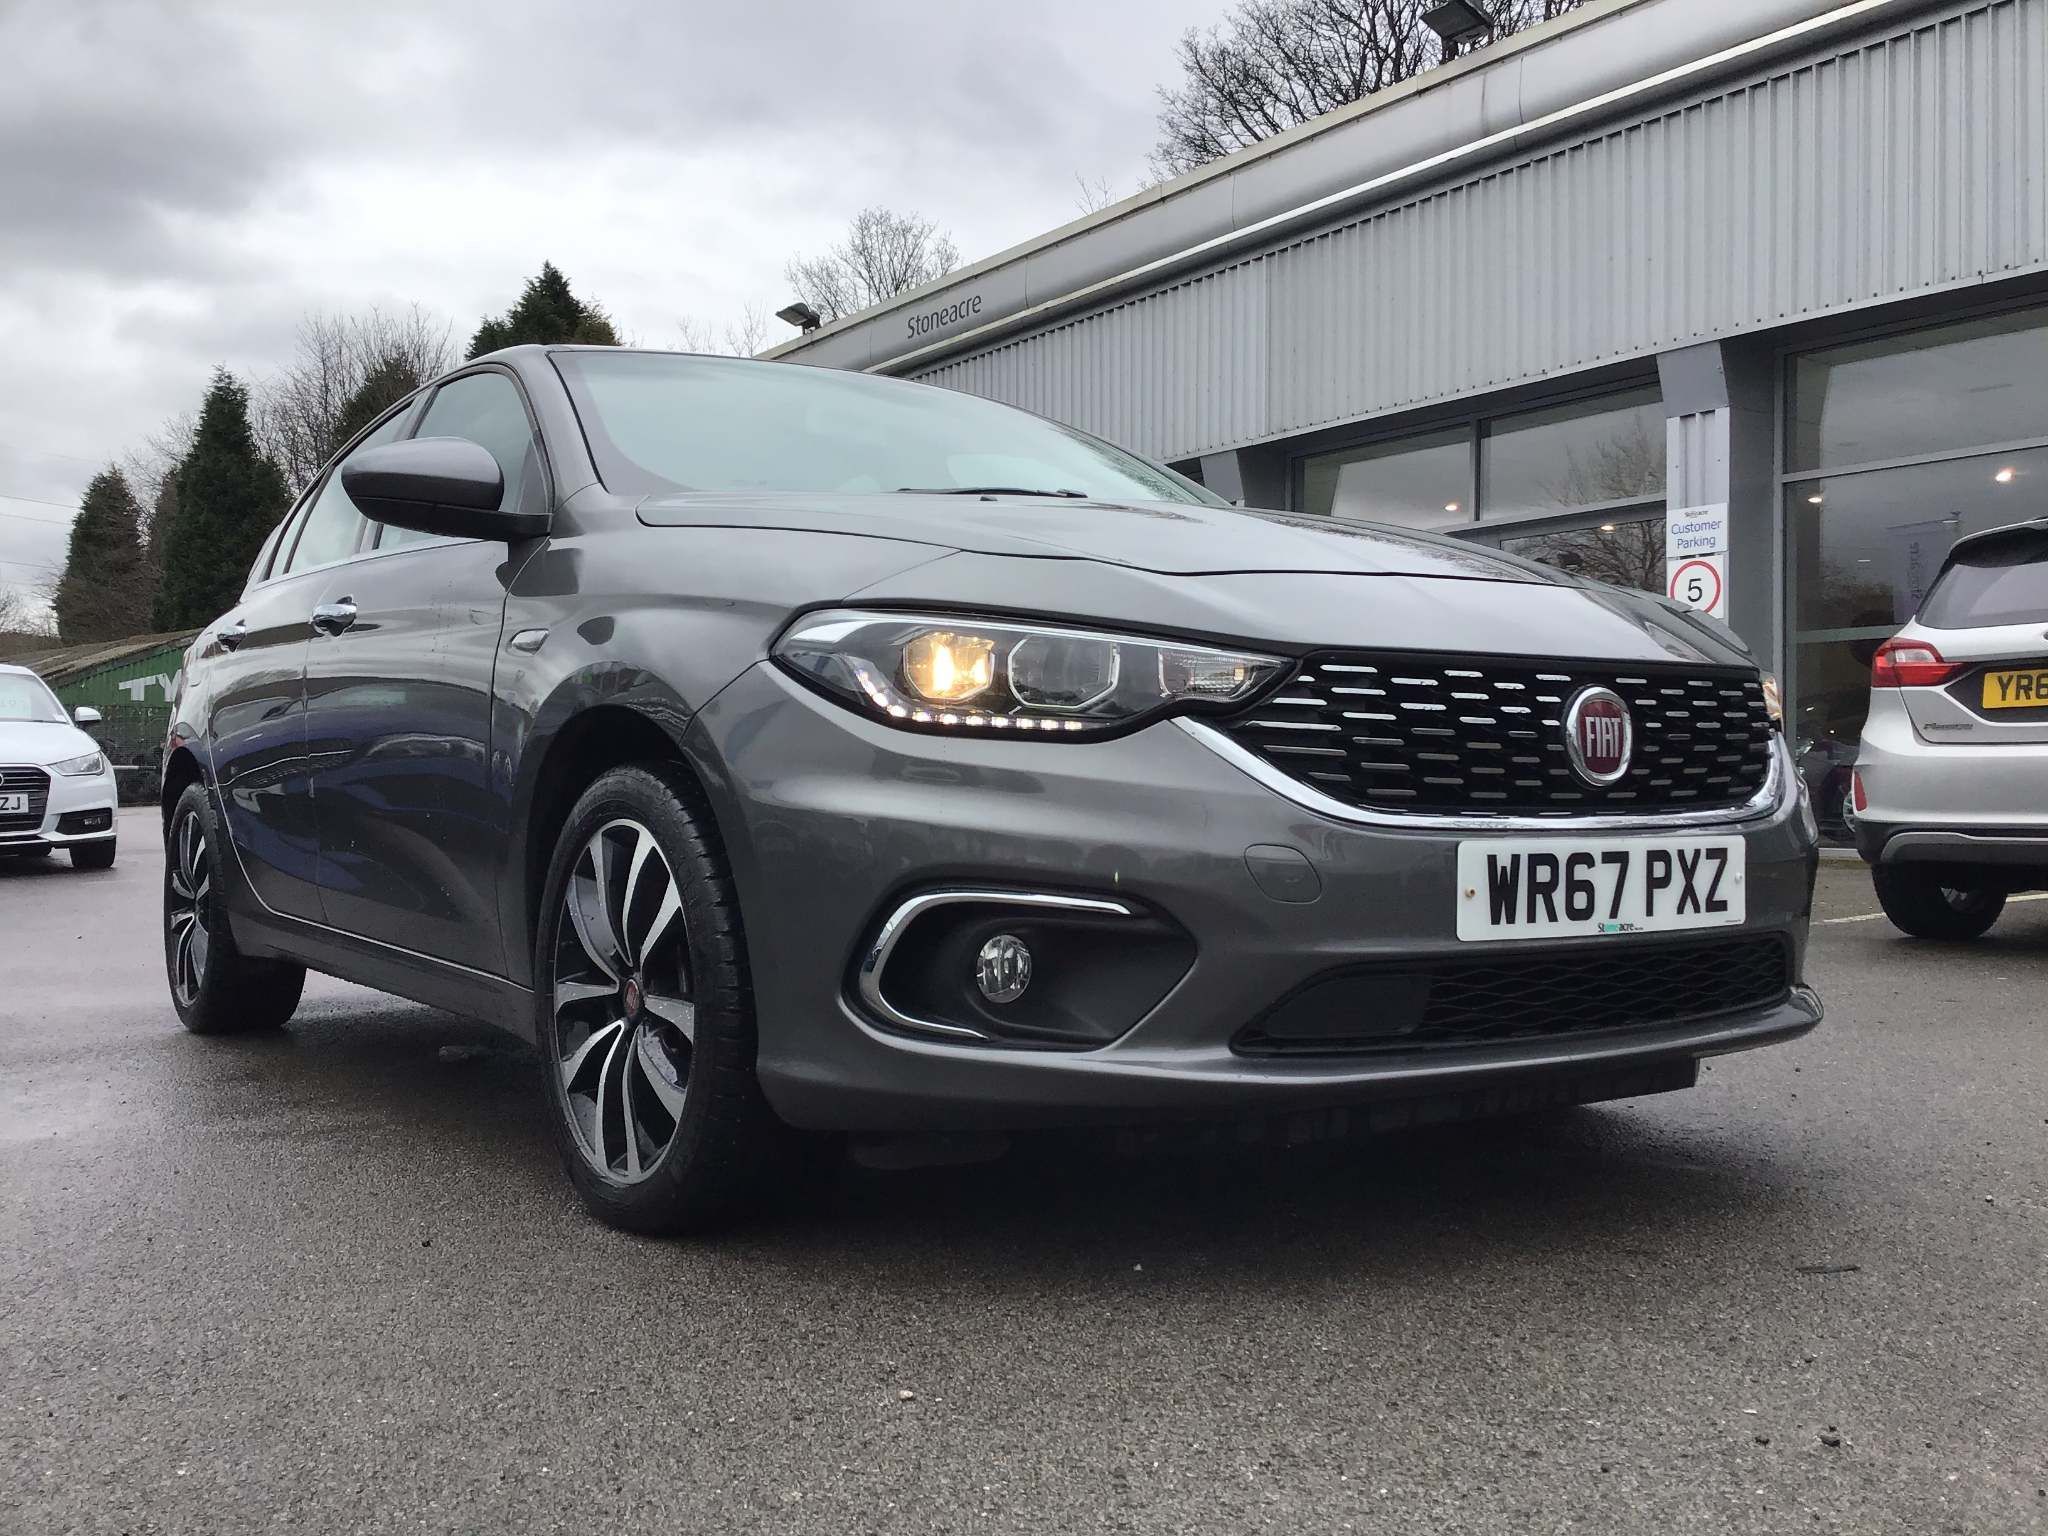 Used Fiat Tipo 1.4 Lounge 5dr (WR67PXZ) Stoneacre